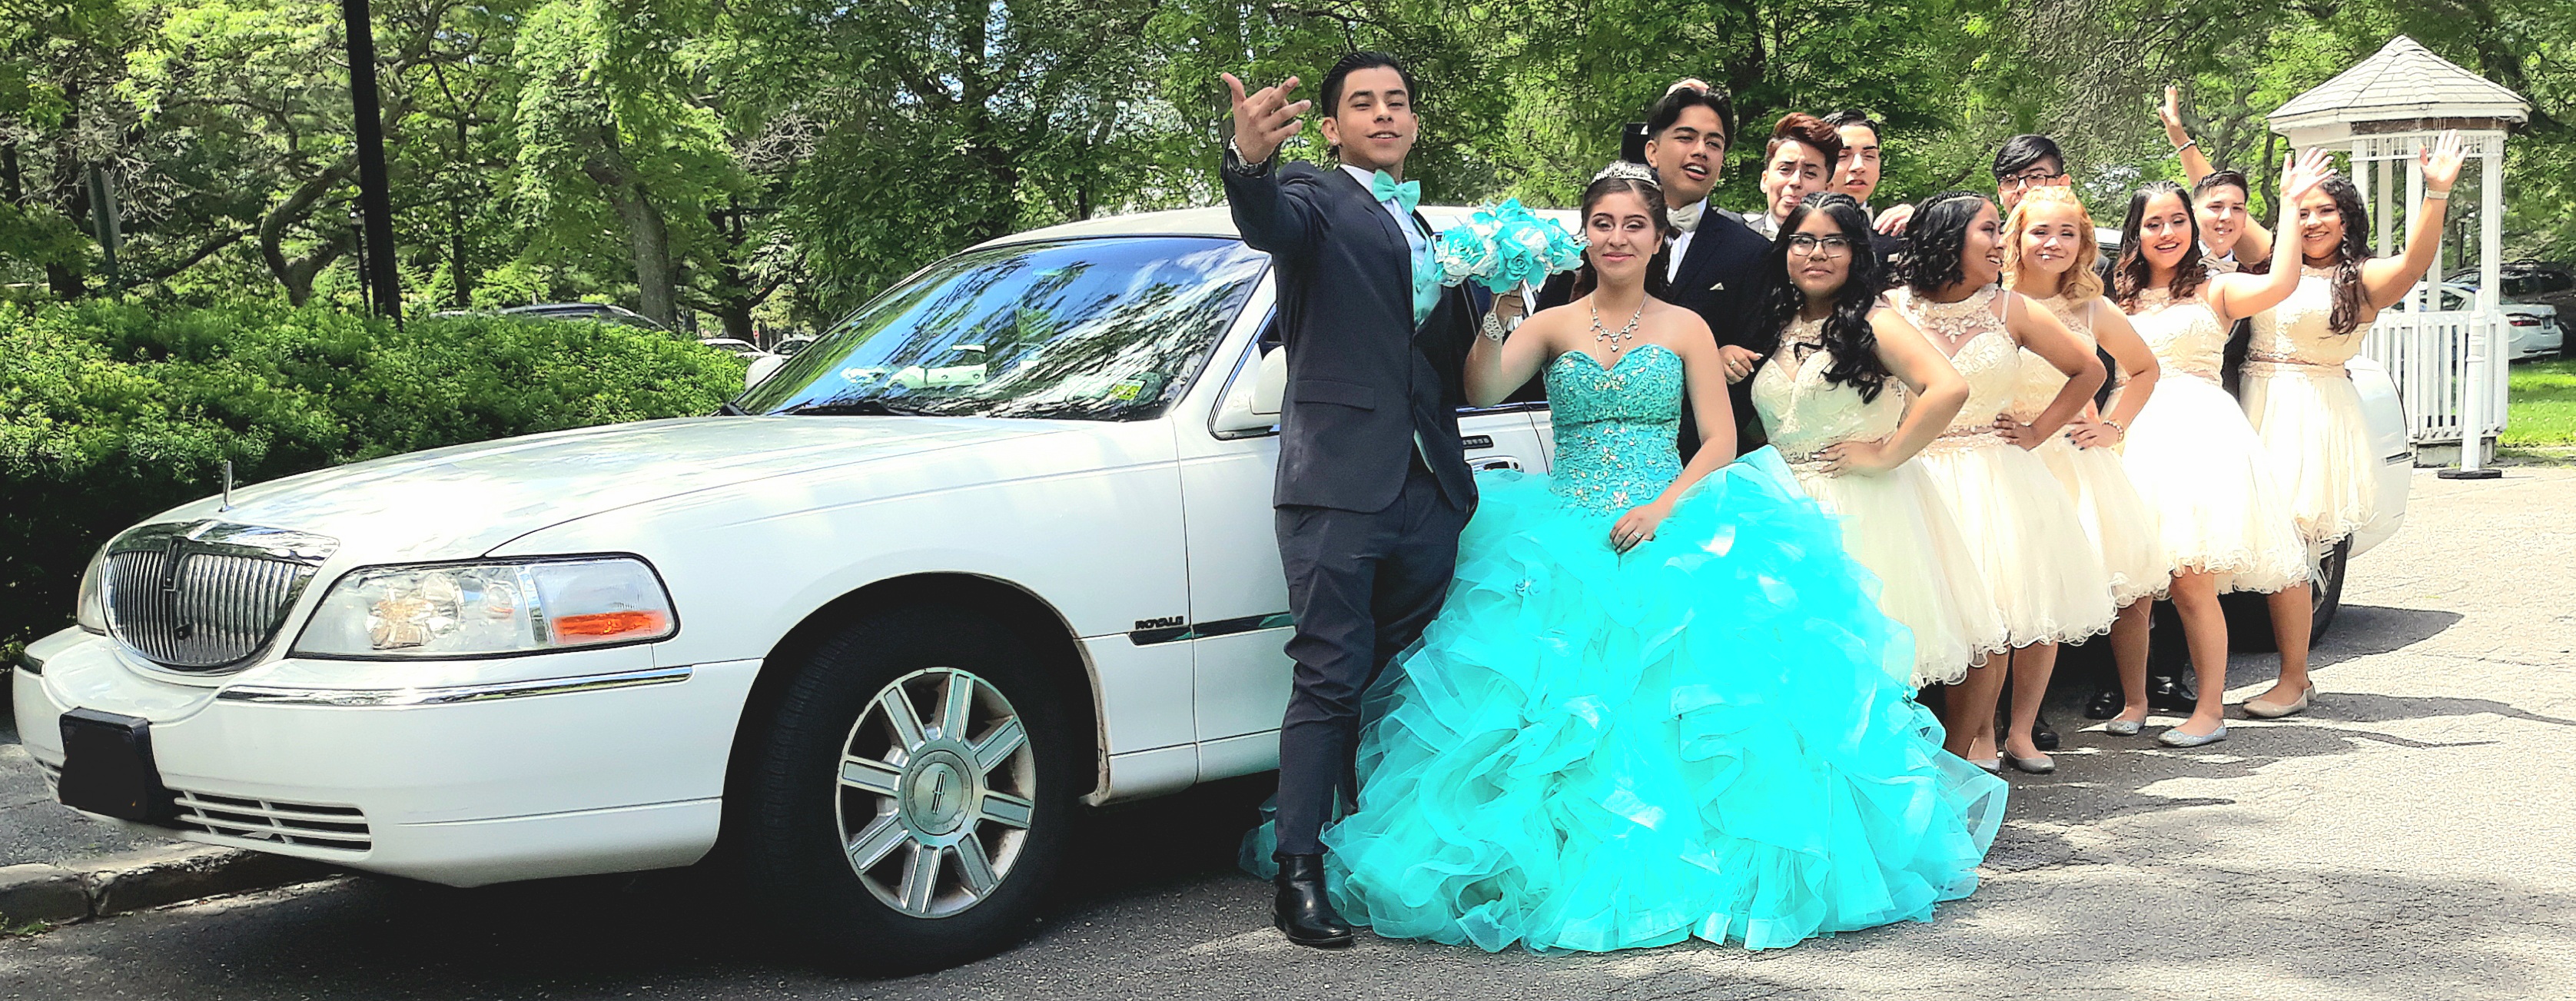 The Most Affordable and Trusted Quinceañera Limo Service in Long Island